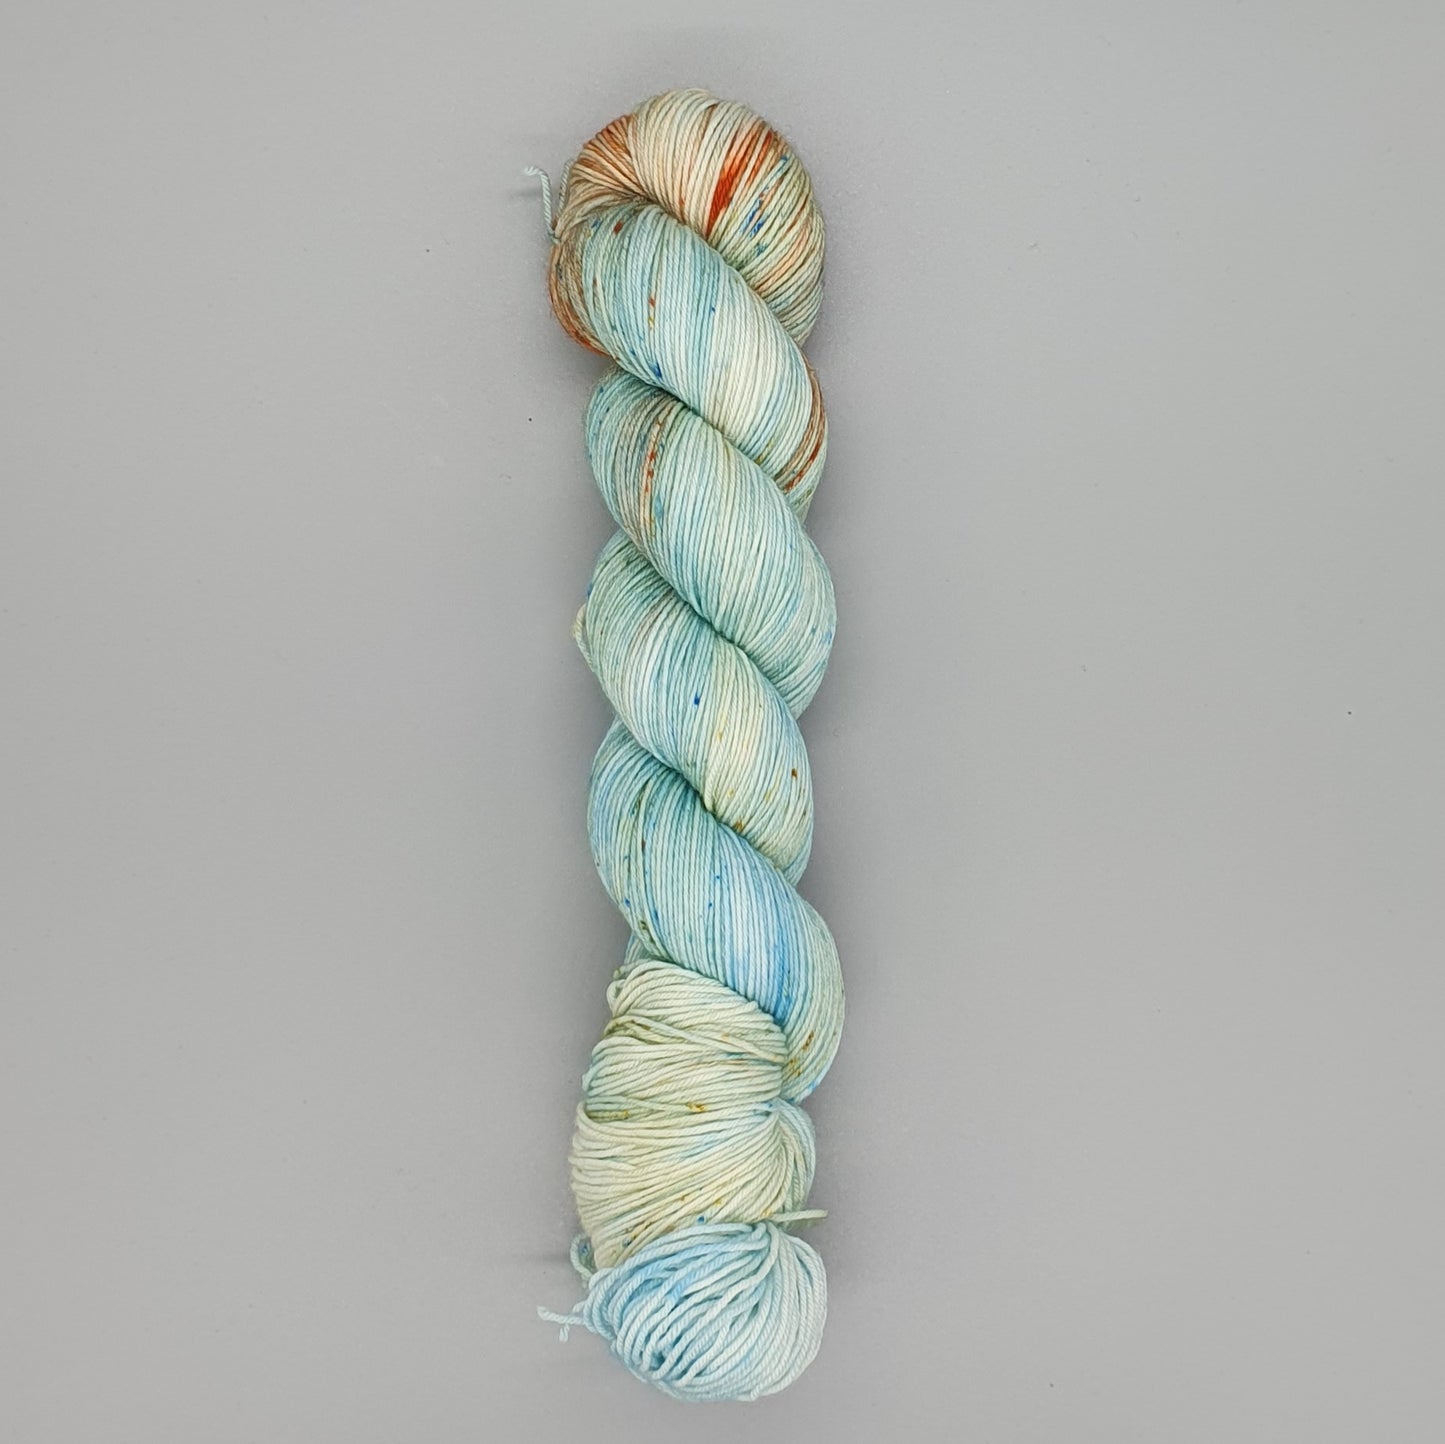 DYED TO ORDER - The Tale Of Peter Rabbit